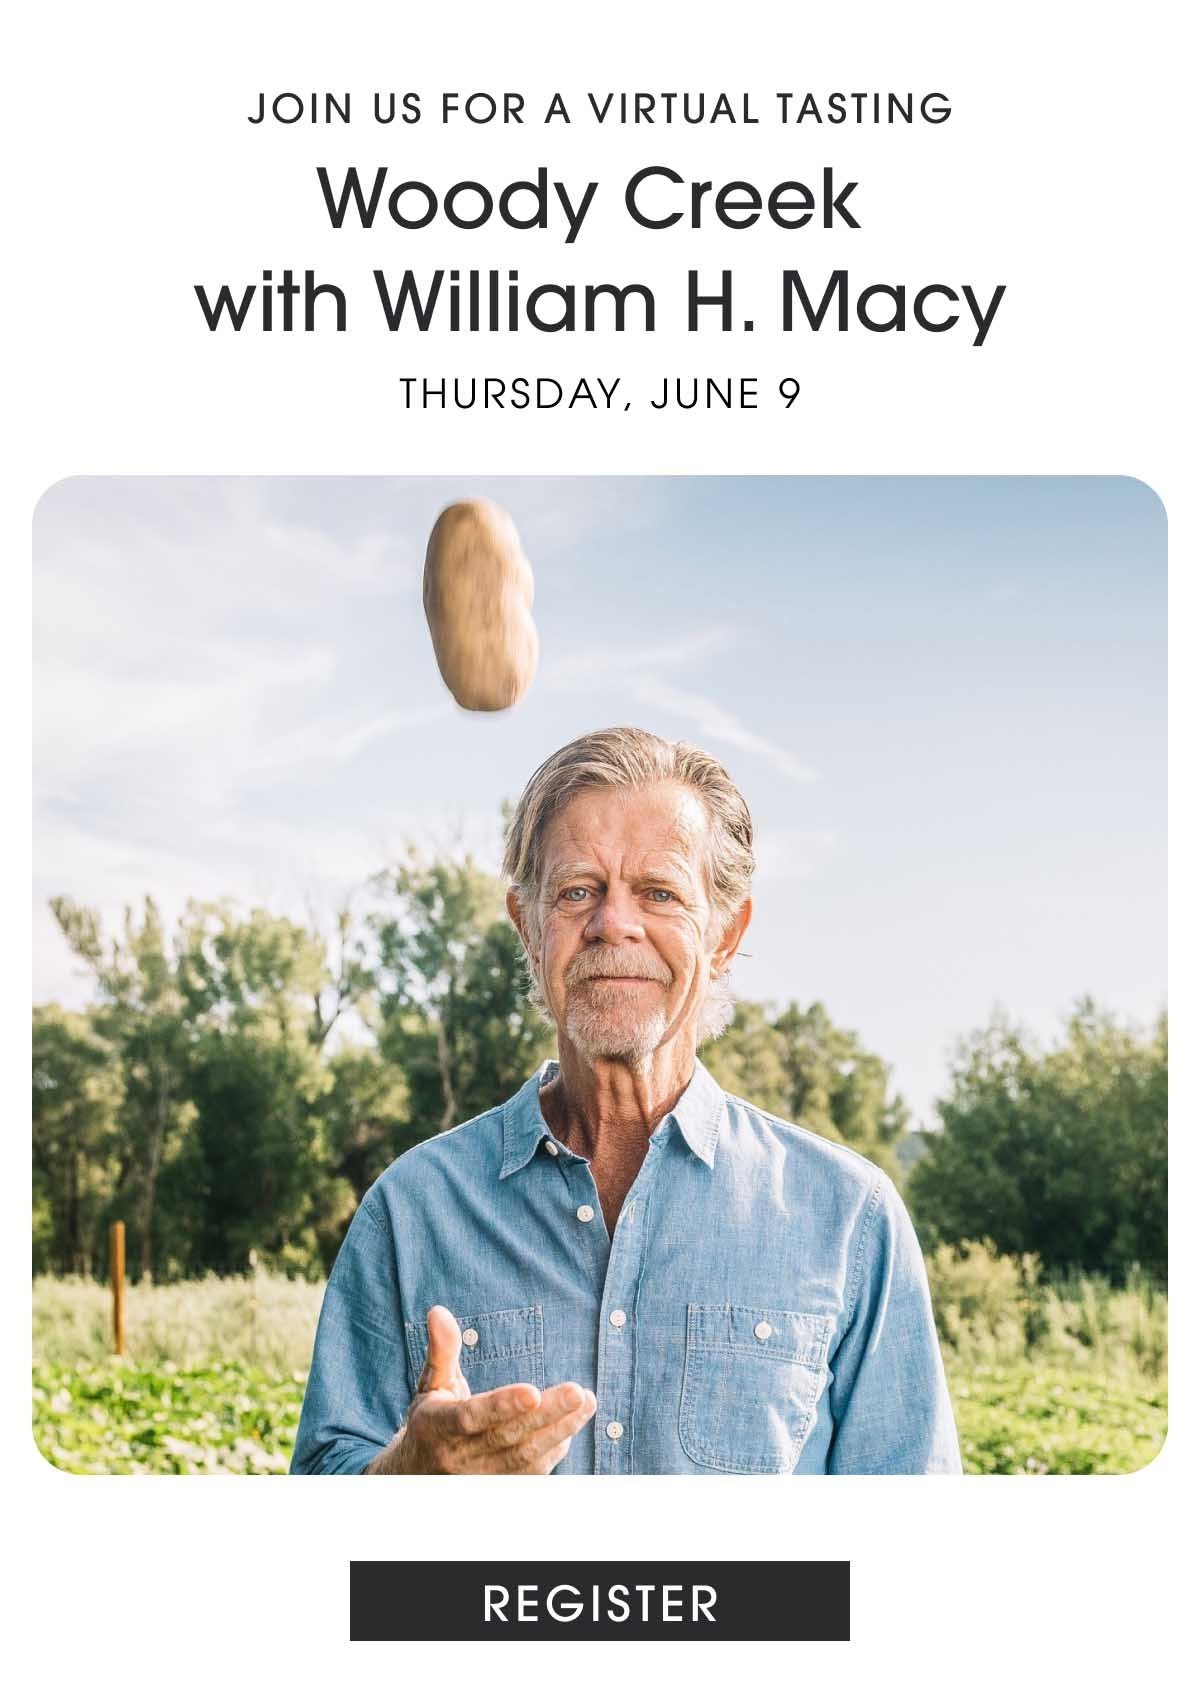 Join us for a Virtual Tasting - Woody Creek with William H Macy